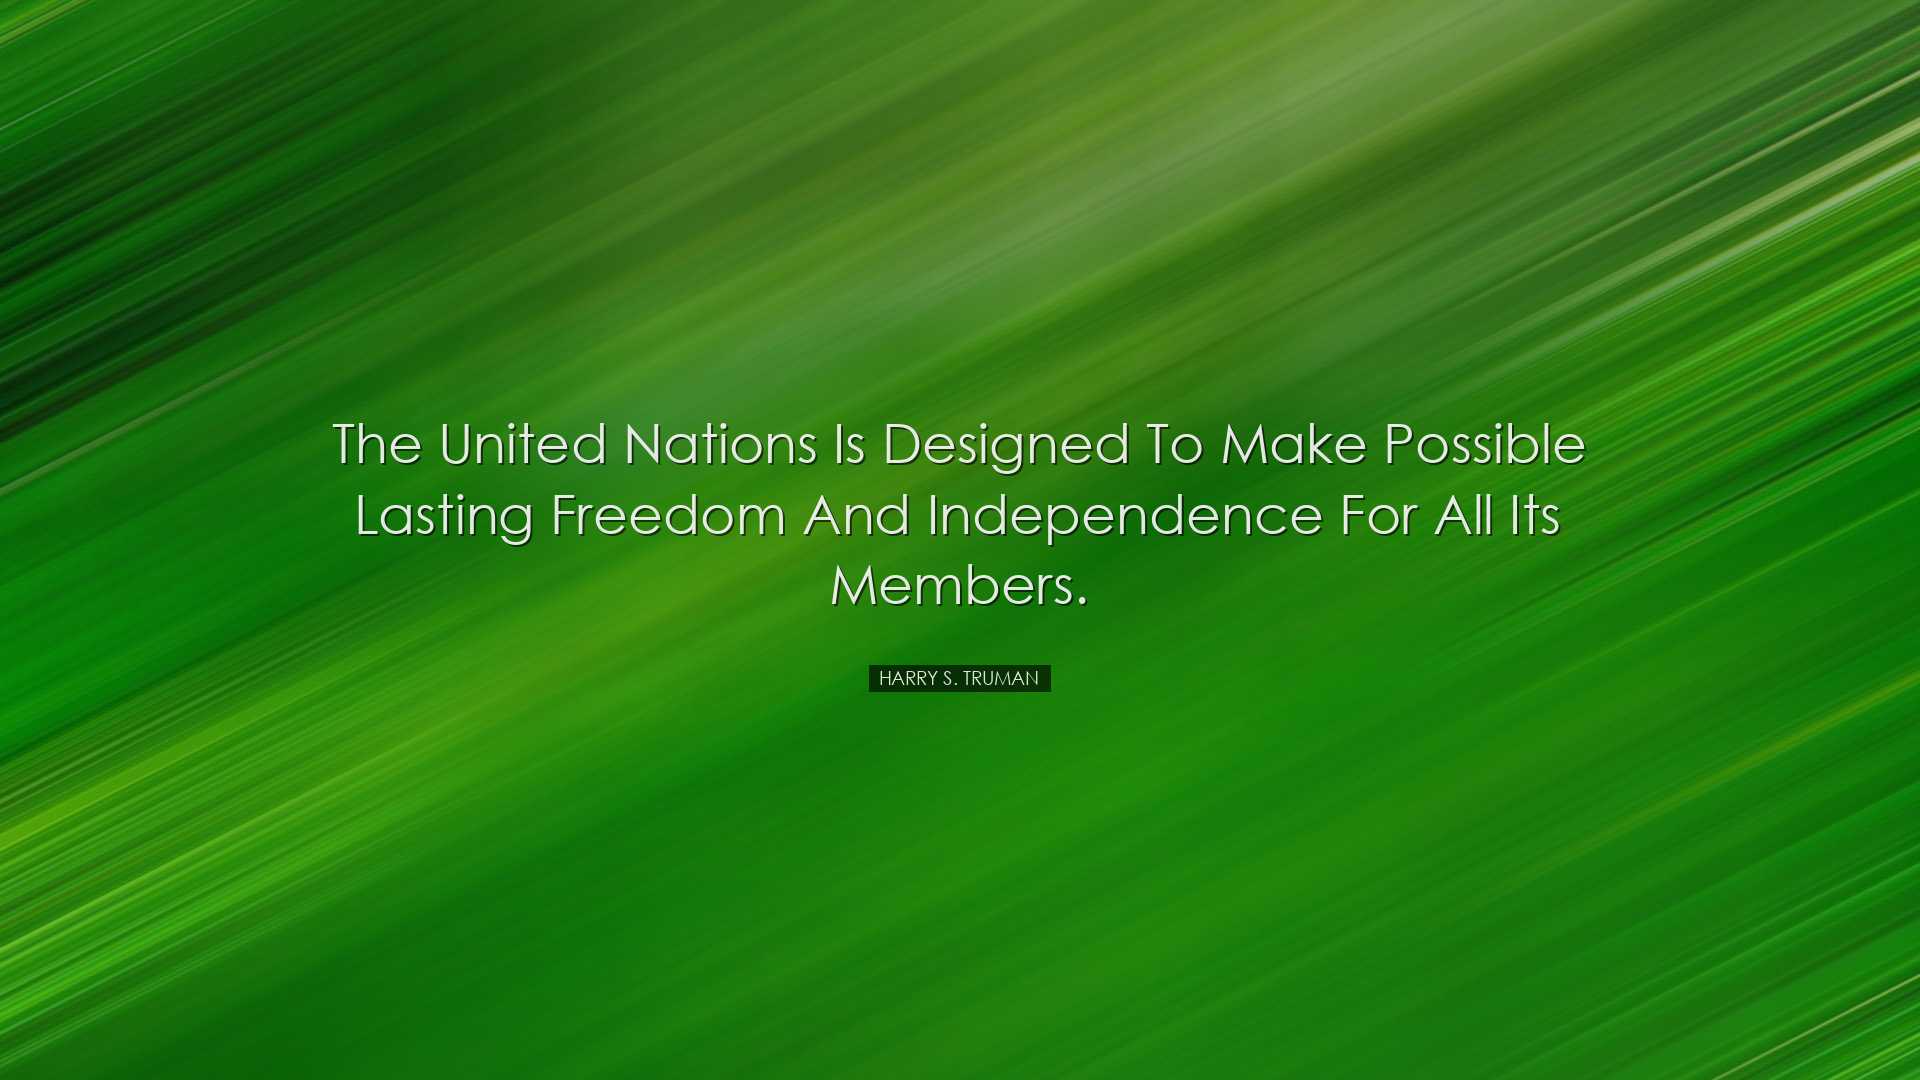 The United Nations is designed to make possible lasting freedom an